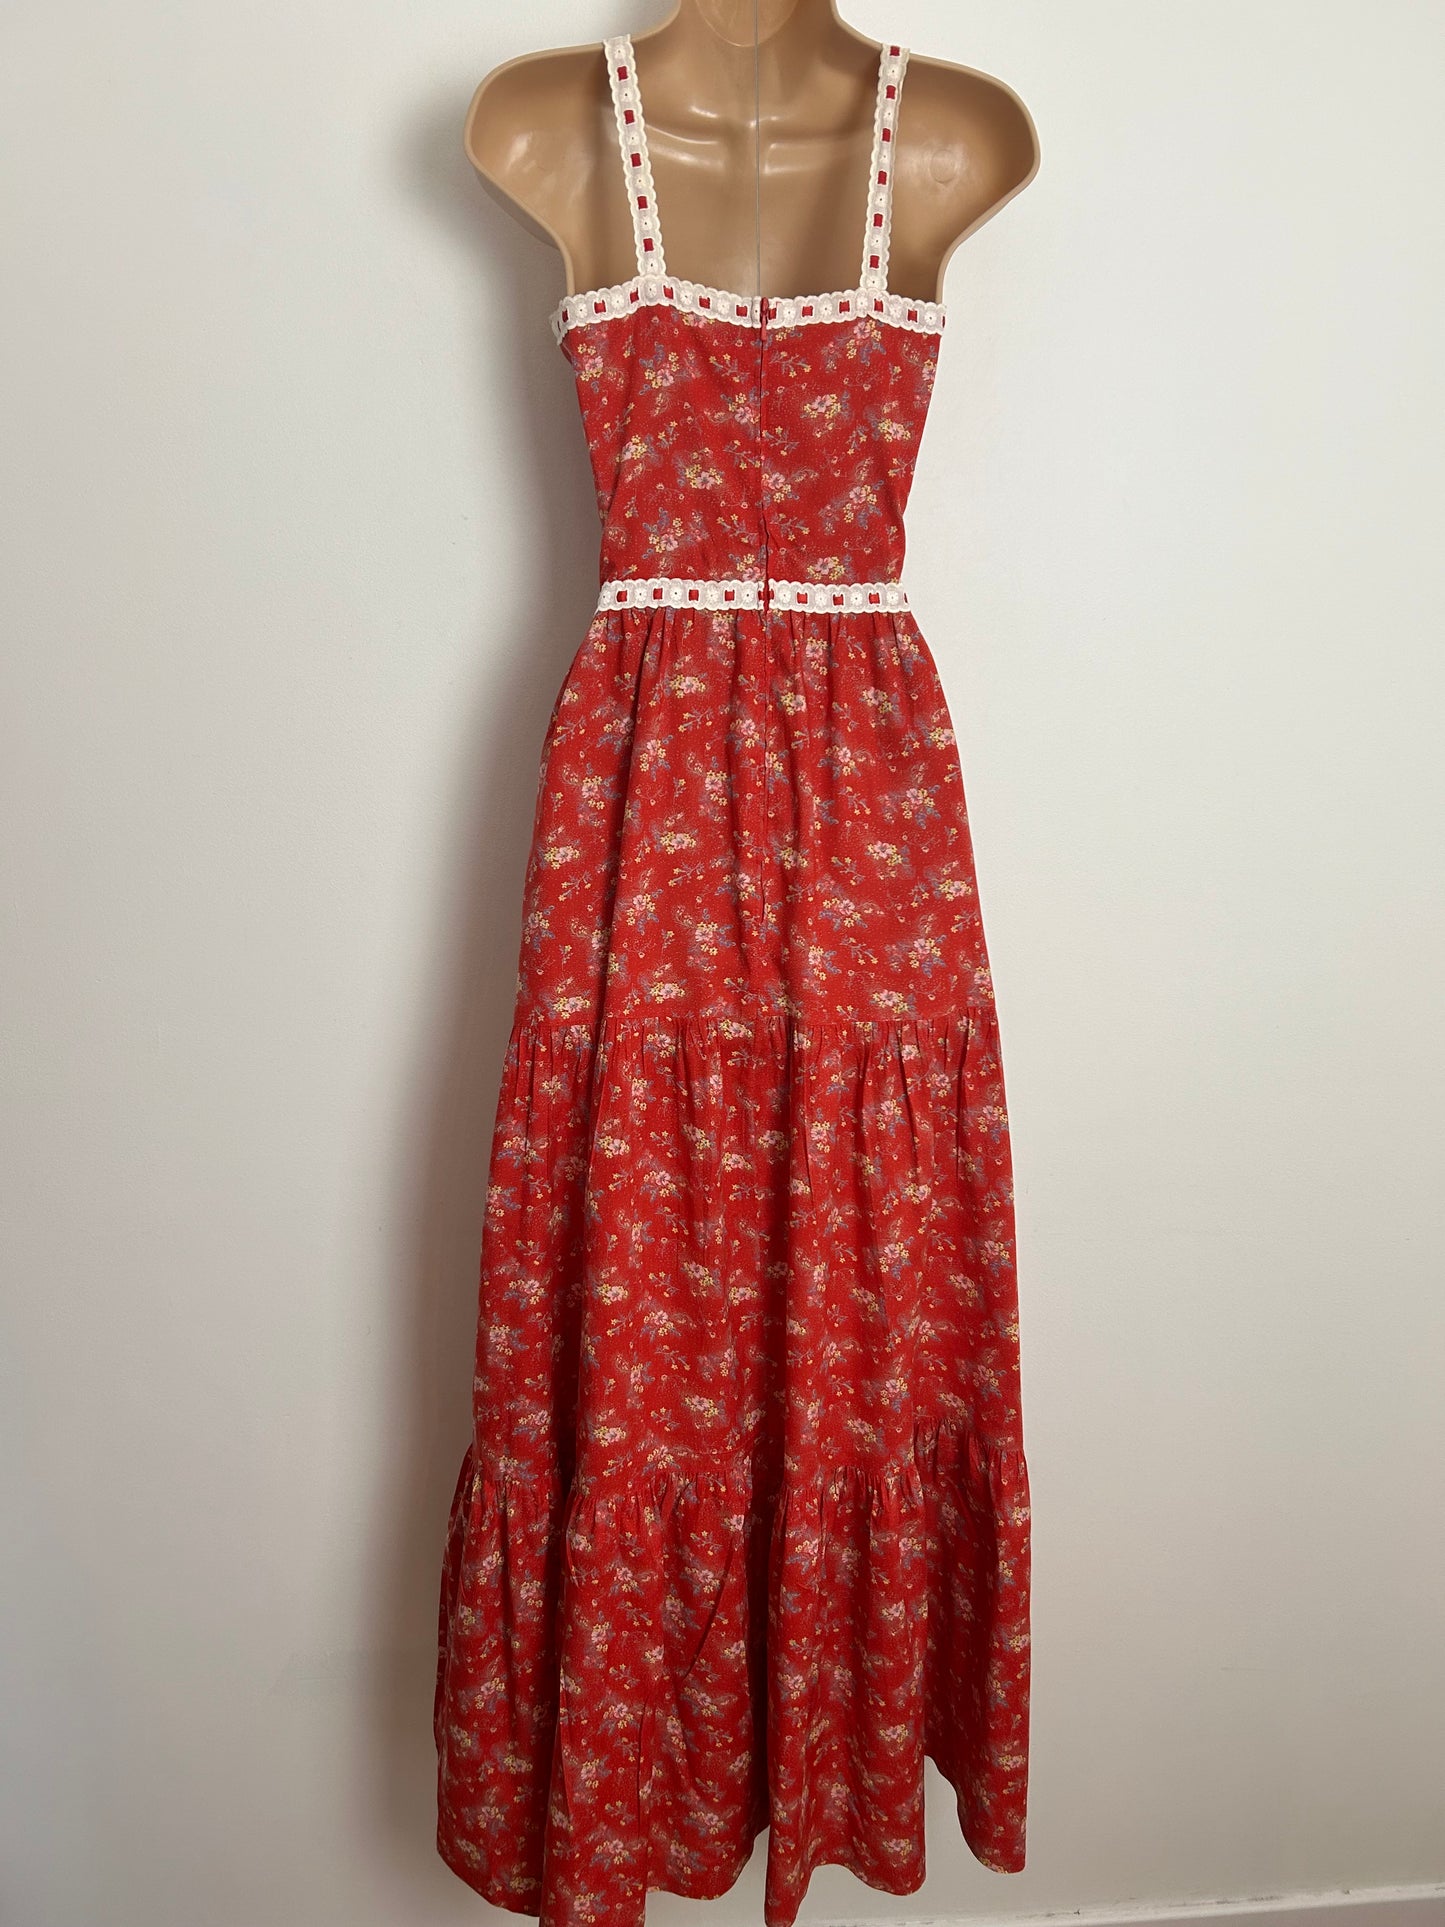 Vintage 1970s ABOUT NICK UK Size 4-6 Pretty Red Ditsy Floral Print Lace Trim 100% cotton Summer Prairie Maxi Dress